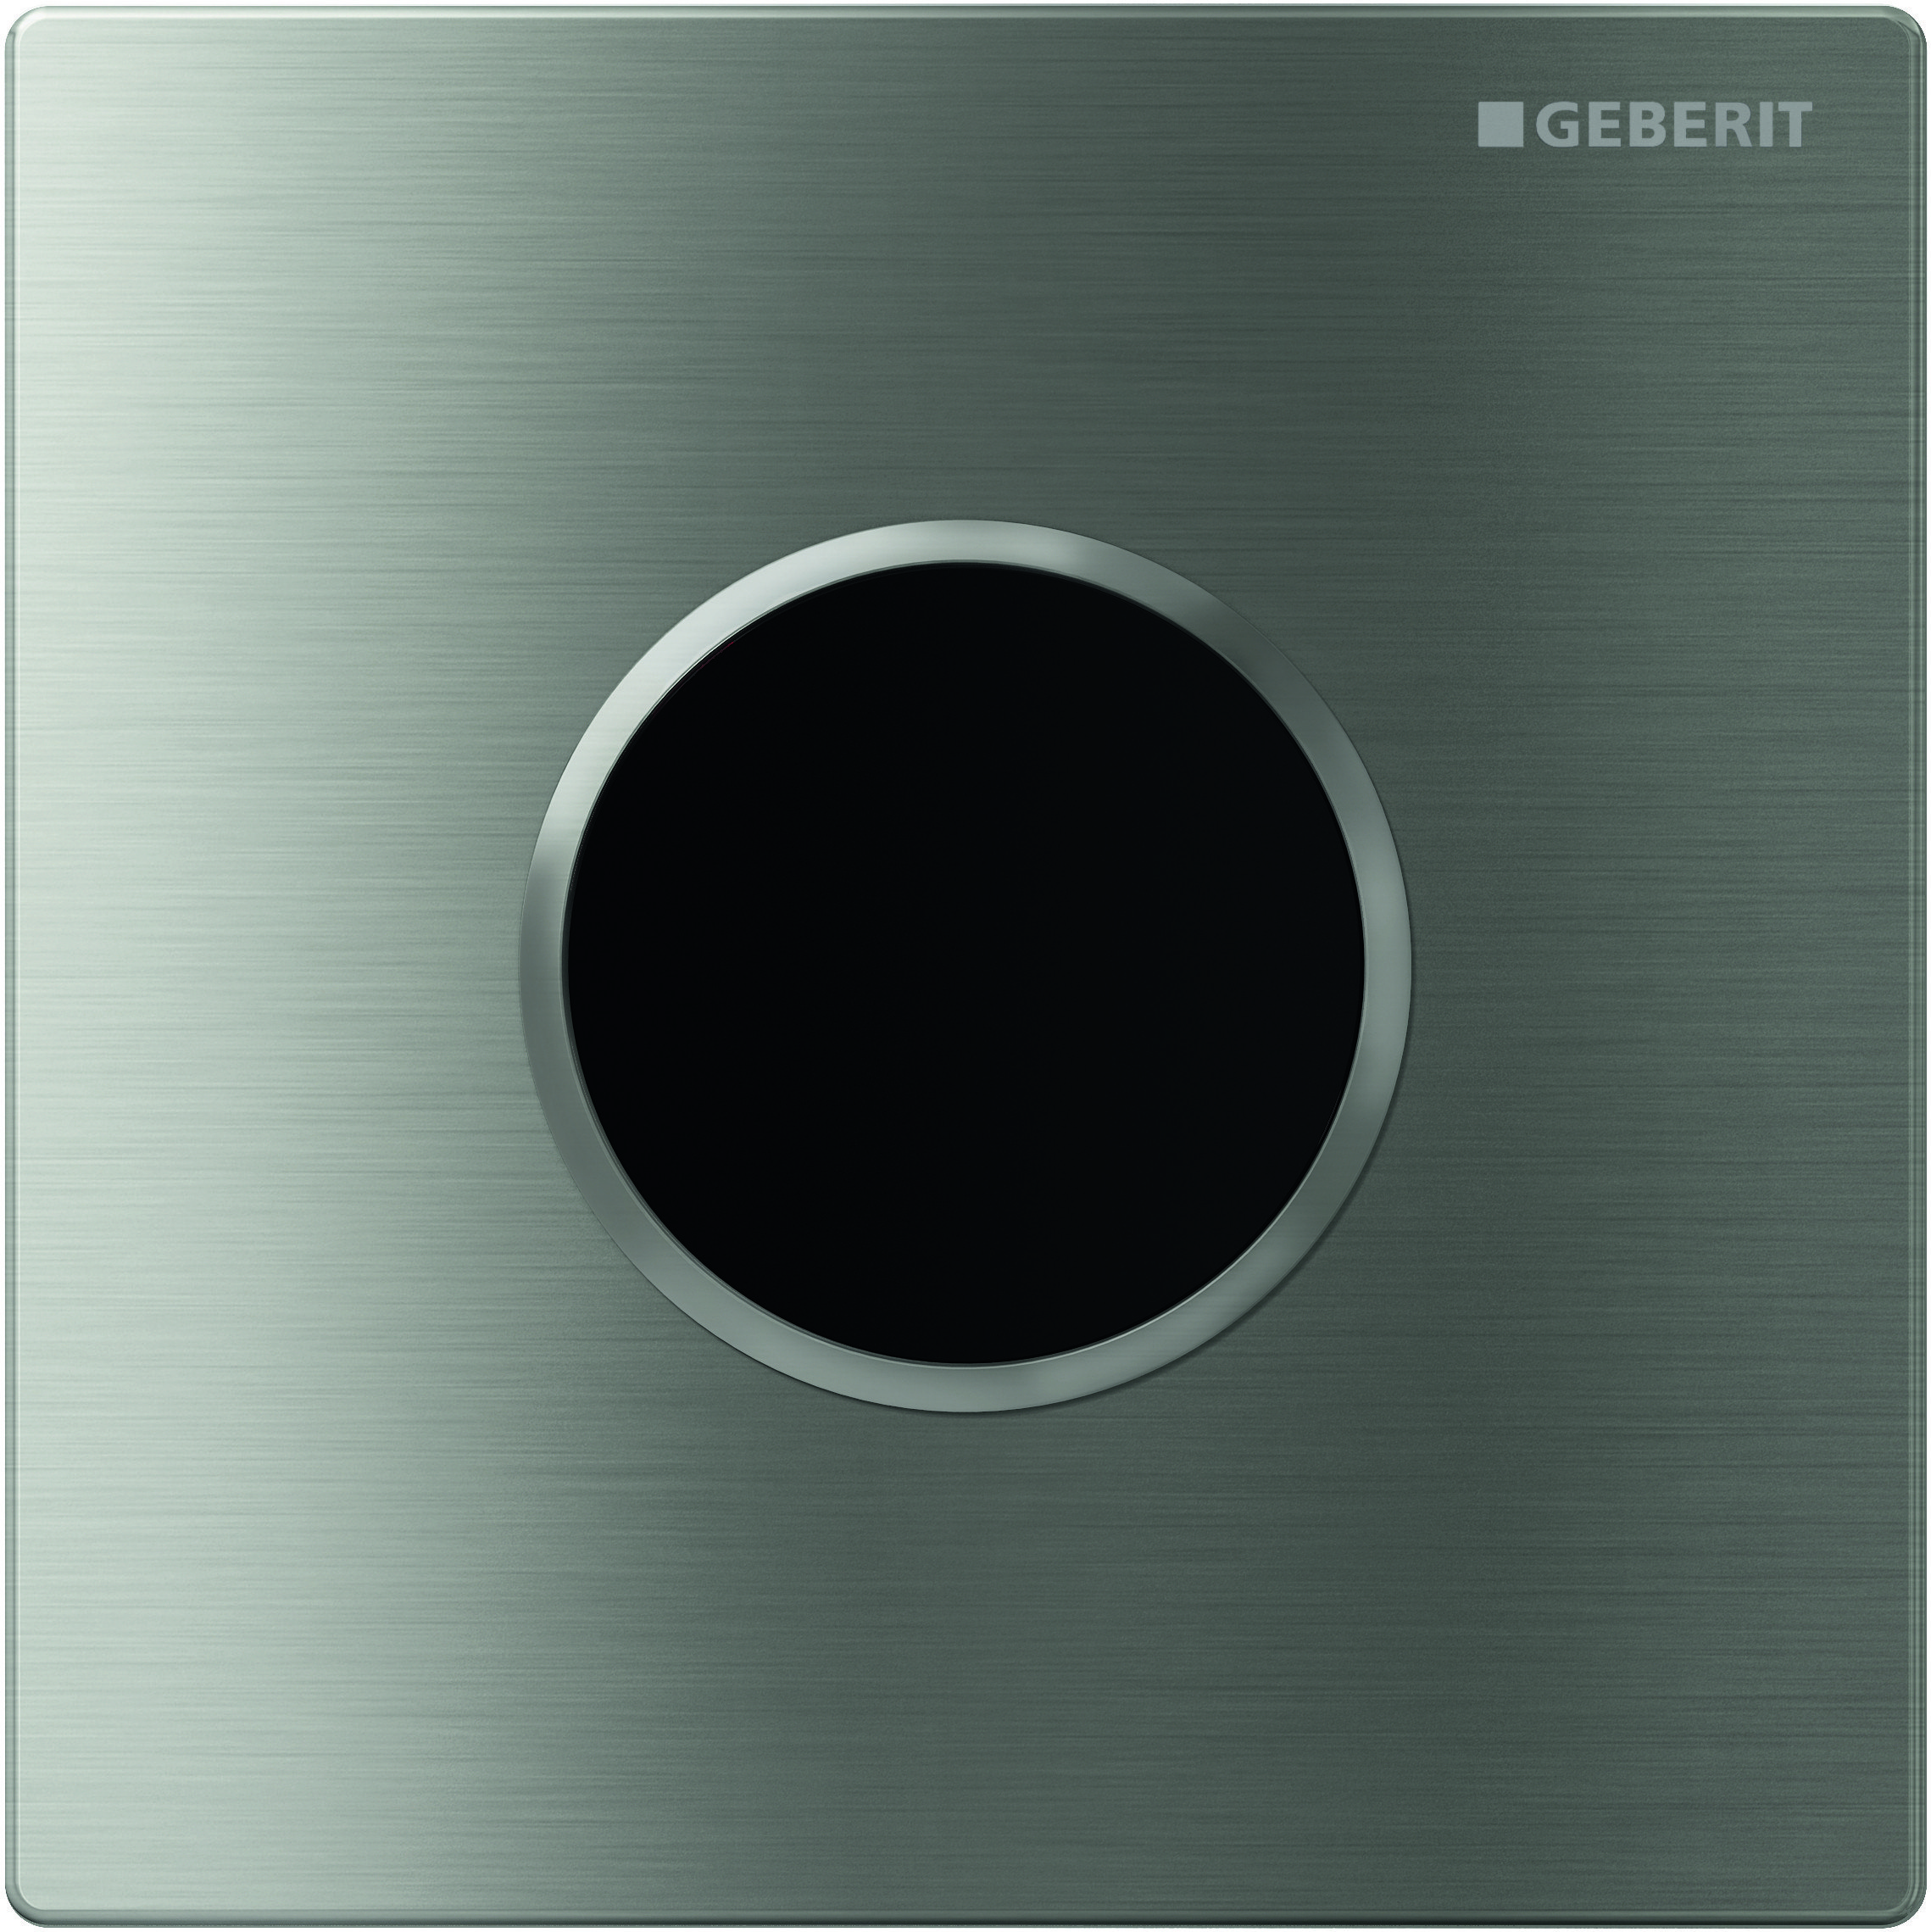 GEBERIT 116.025.SN.1 SIGMA10 HANDS FREE FLUSH ACTUATOR PLATE IN BRUSHED STAINLESS STEEL, AC POWER